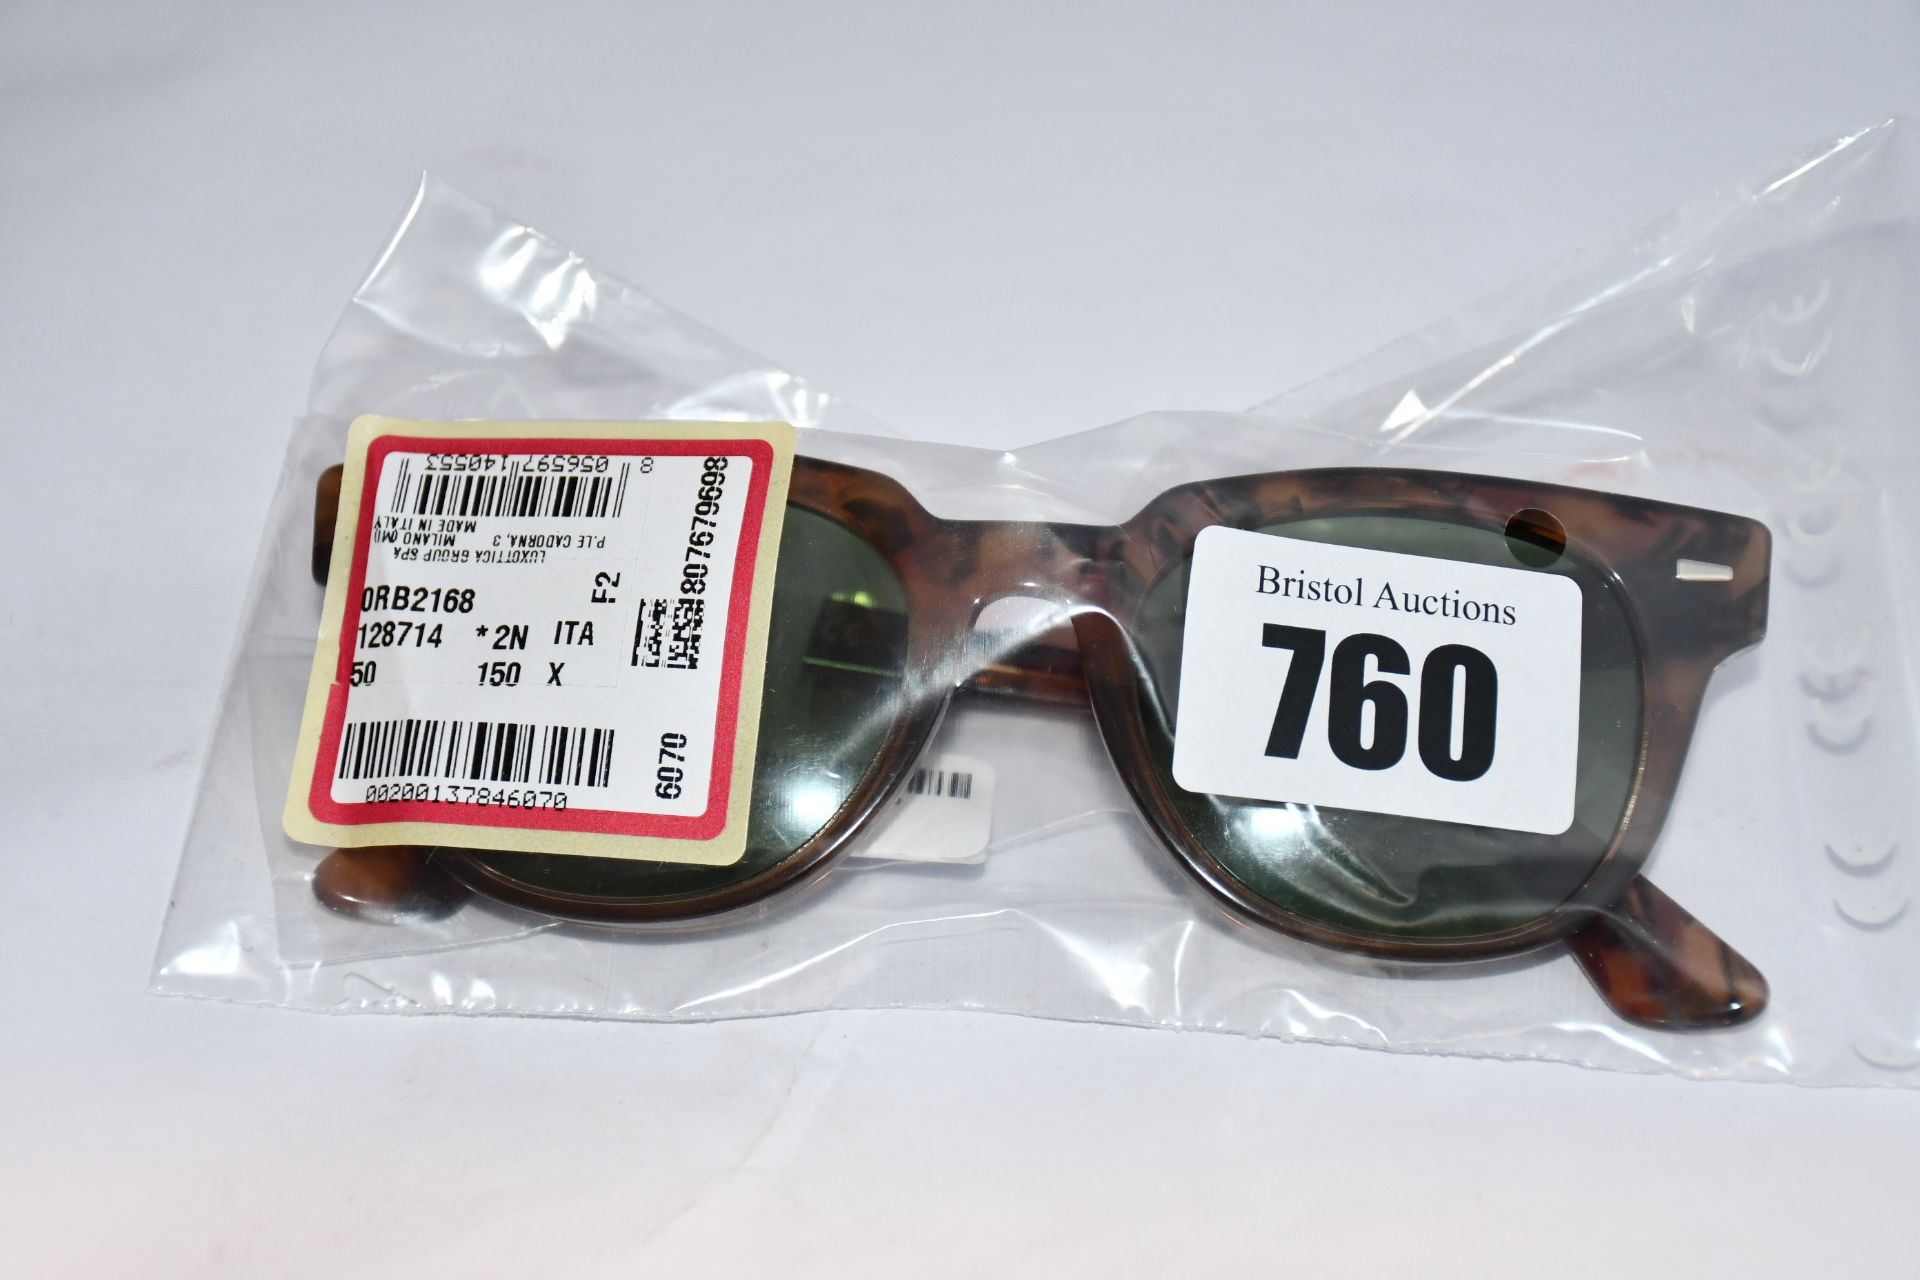 A pair of as new Ray Ban sunglasses (No case).